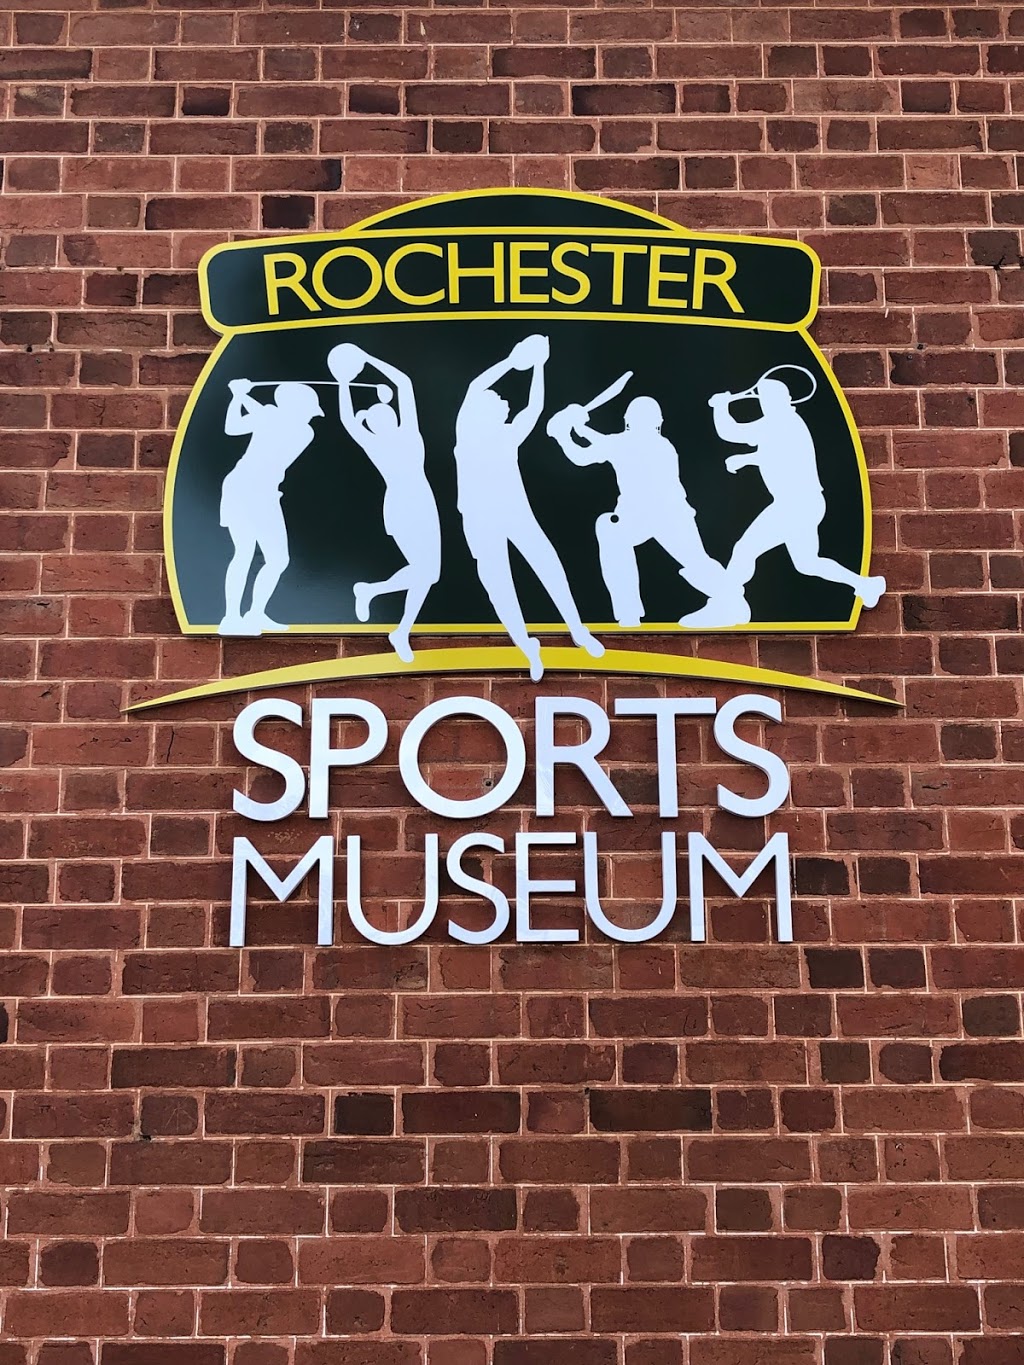 Rochester Sports Museum (Rochester VIC 3561) Opening Hours